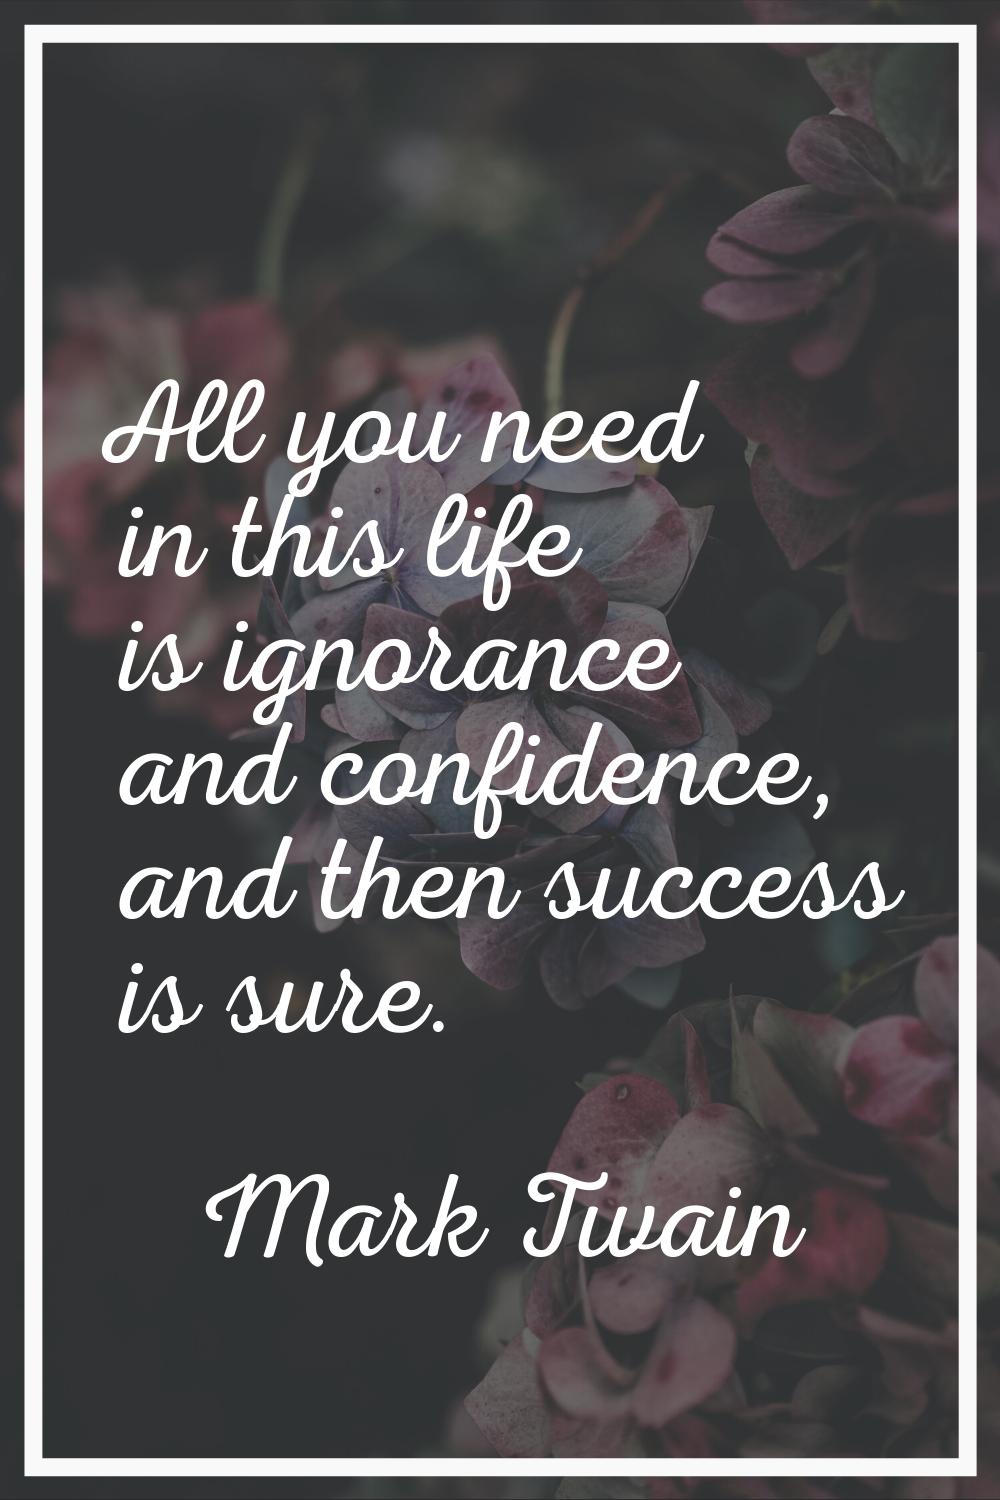 All you need in this life is ignorance and confidence, and then success is sure.